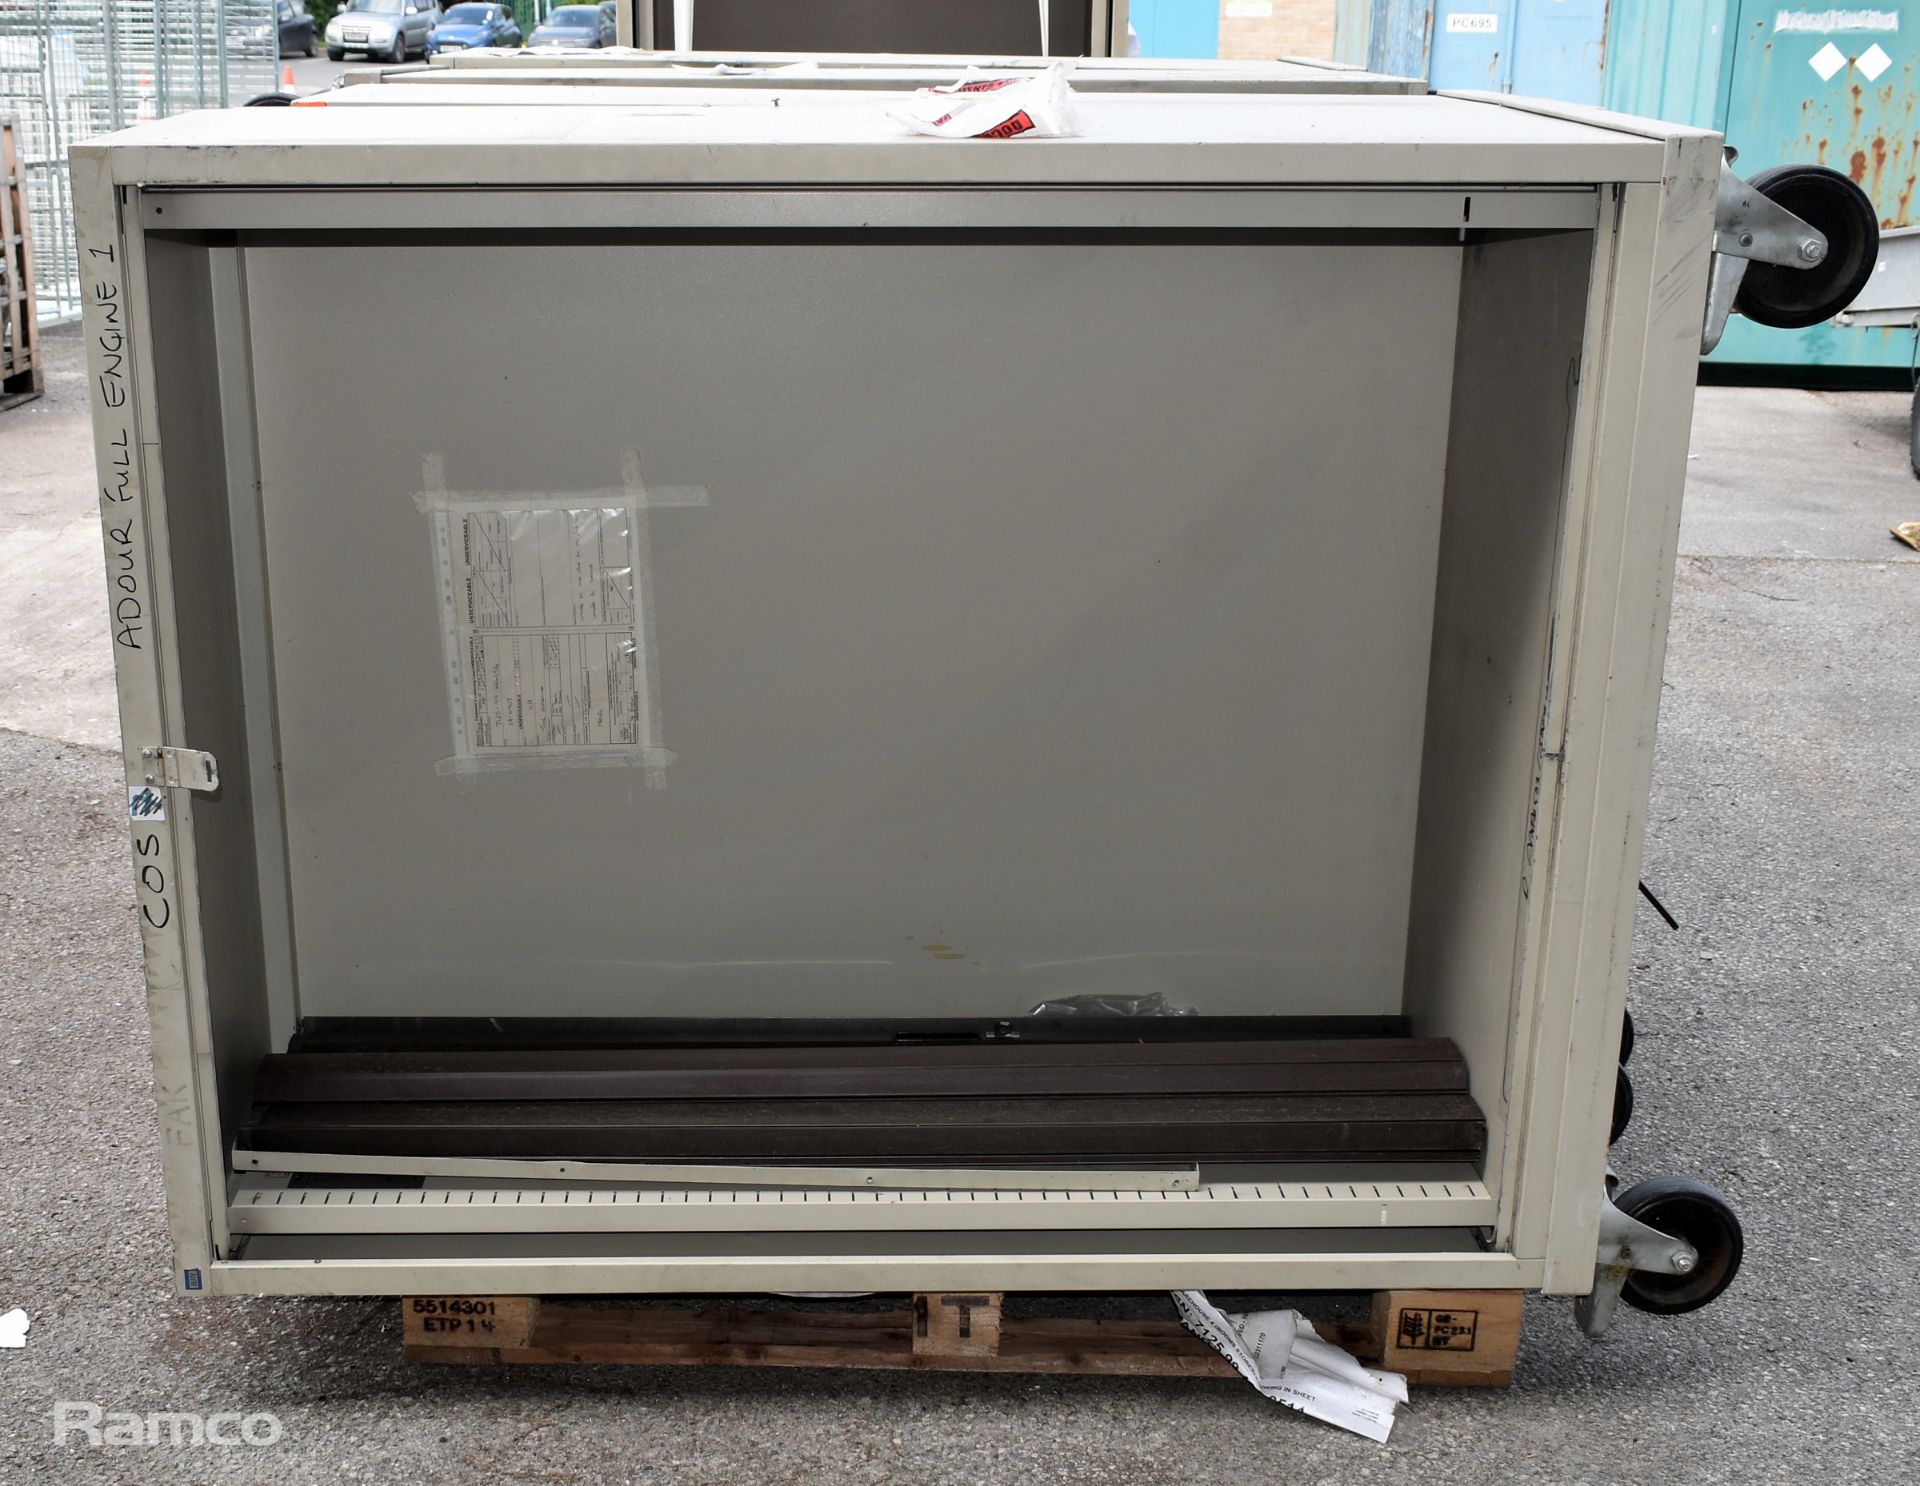 4x Elite mobile maintenance tool cabinet - L 1250 x W 550 x H 1650mm - SPARES OR REPAIRS - Image 2 of 4